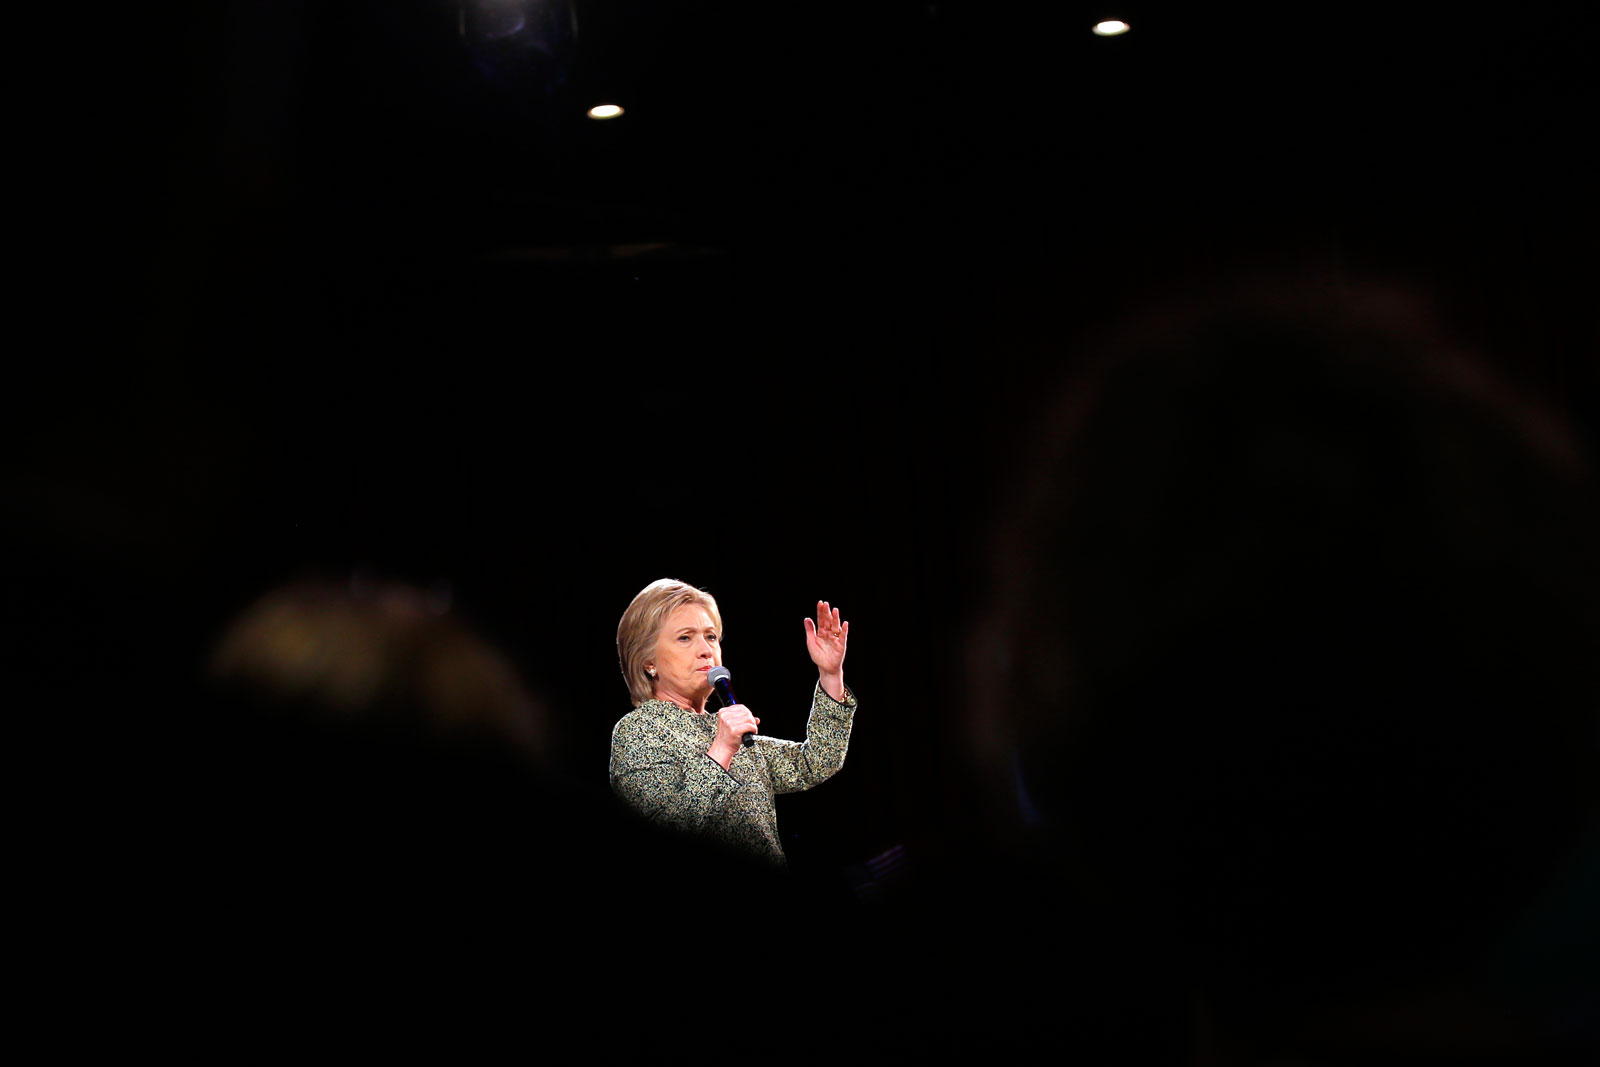 Hillary Clinton speaks to supporters in Tampa, Florida, March 10, 2016